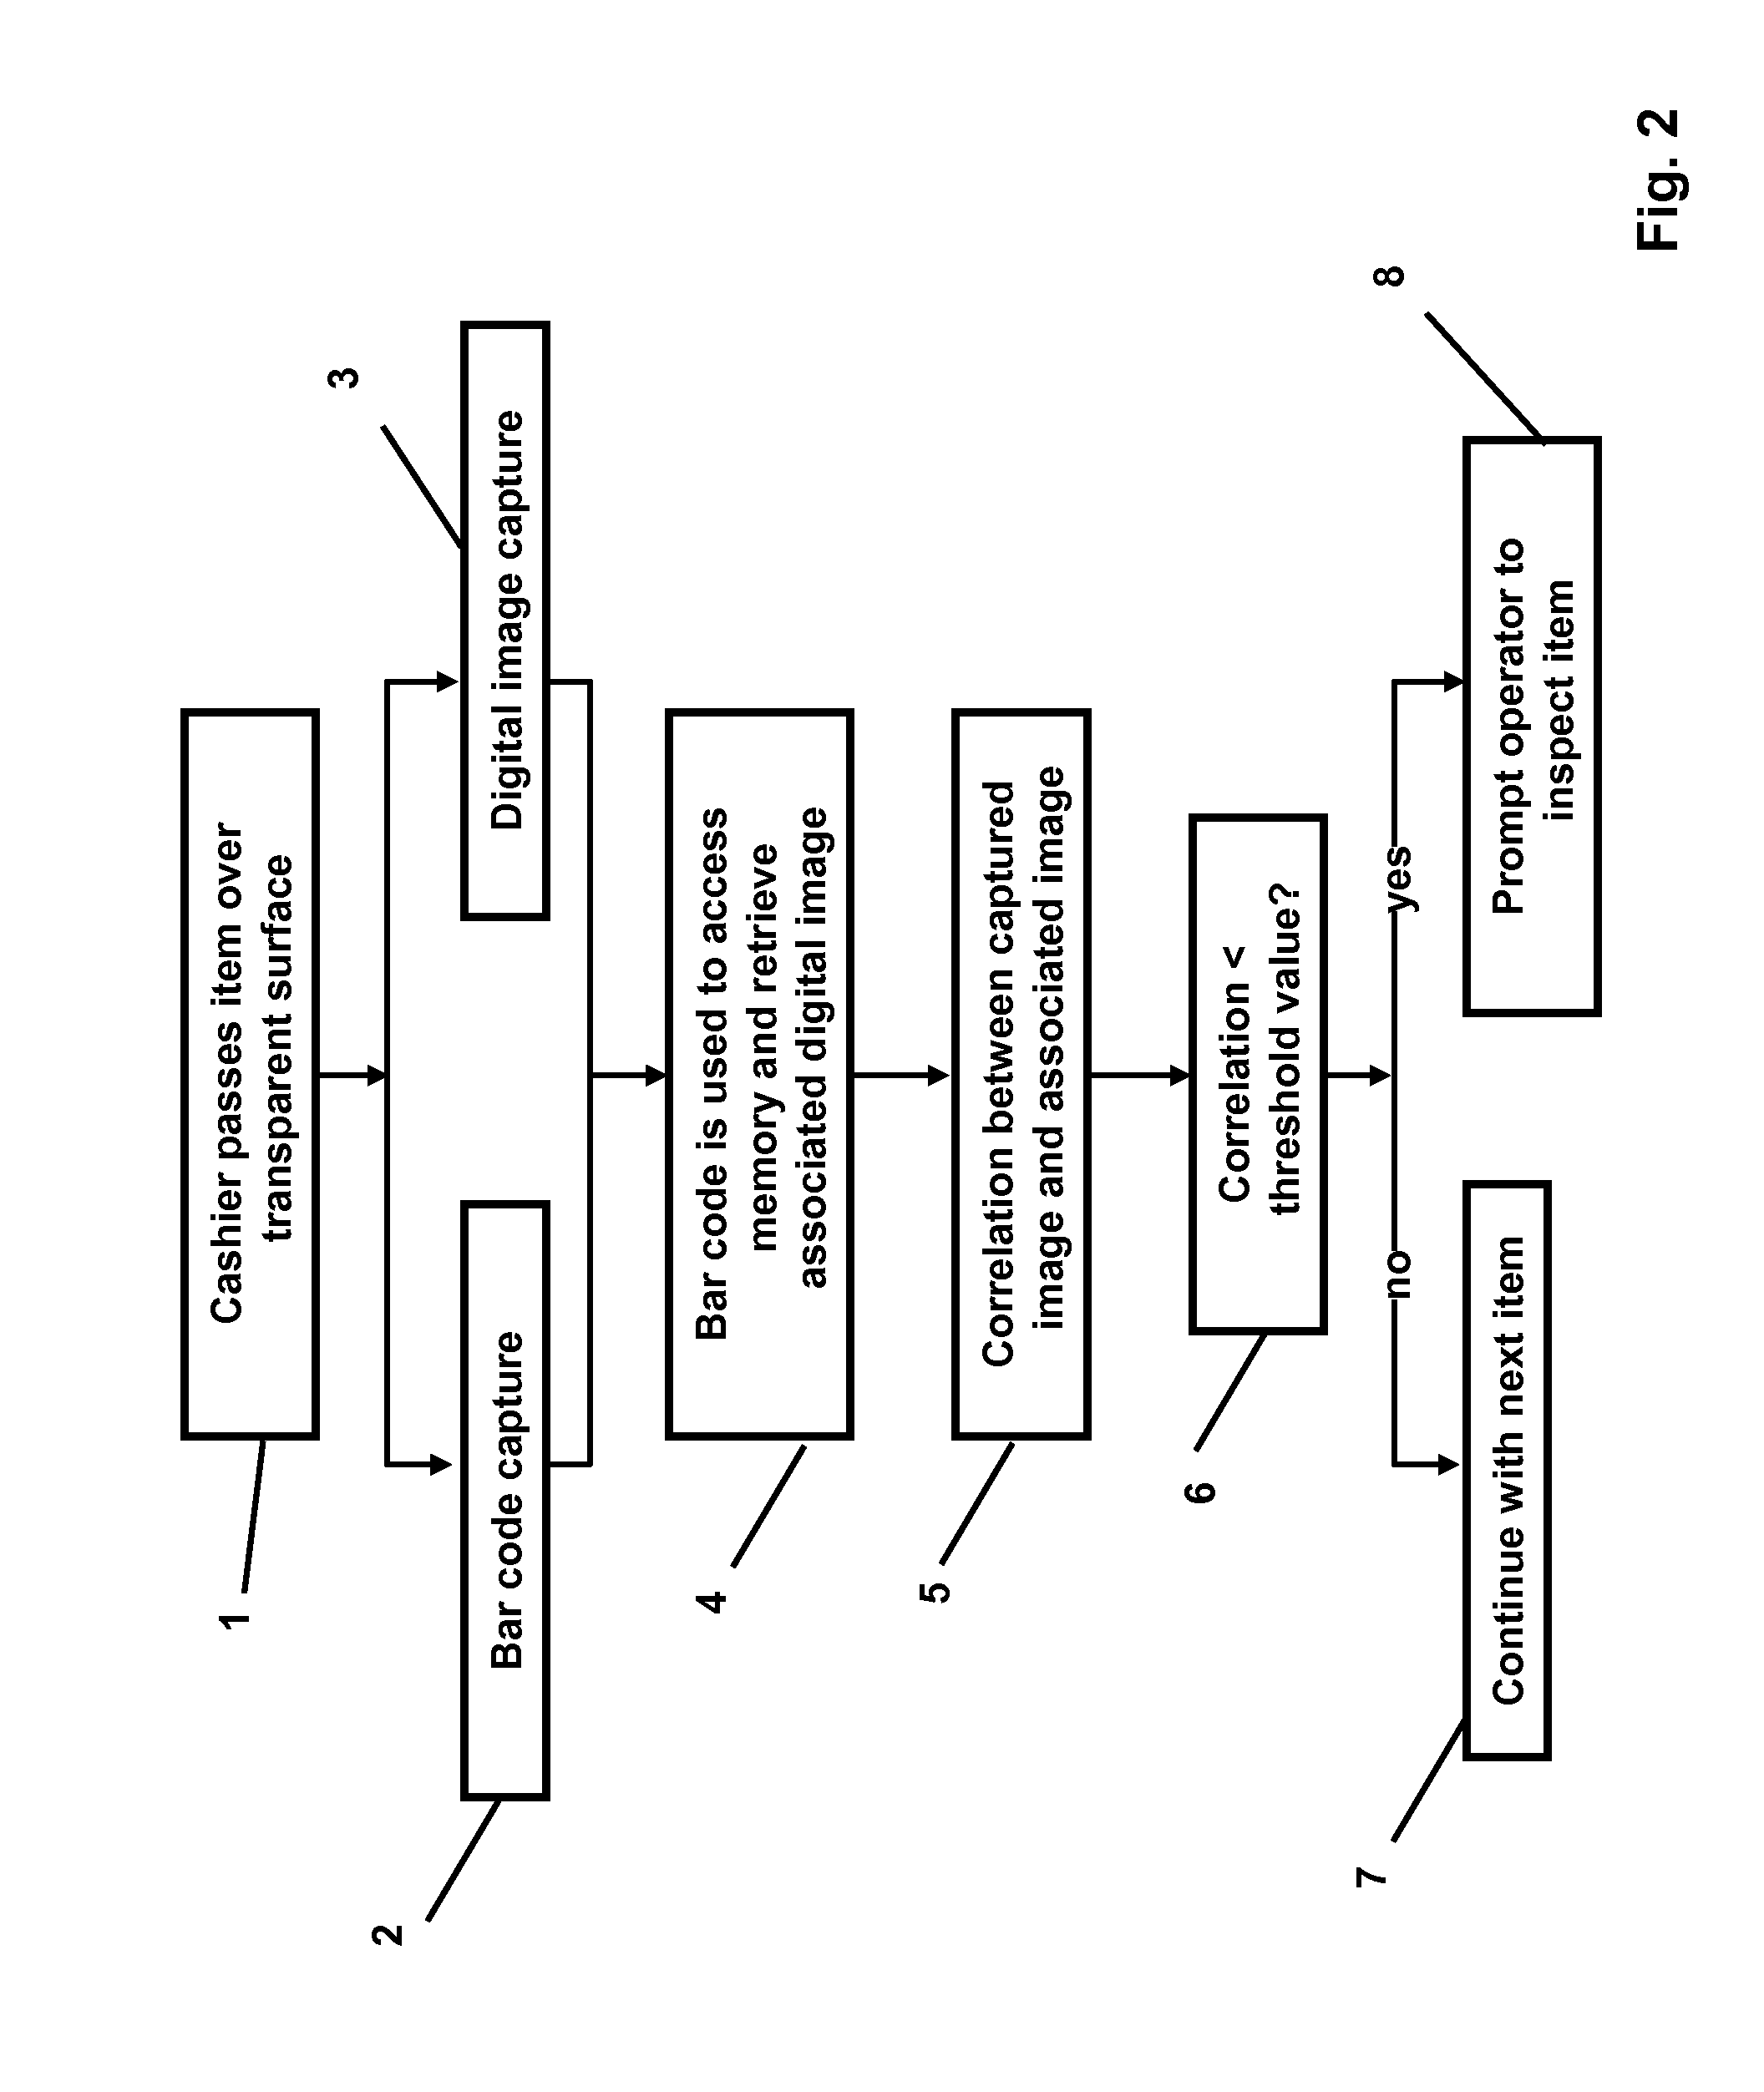 System and method for detecting fraudulent transactions of items having item-identifying indicia